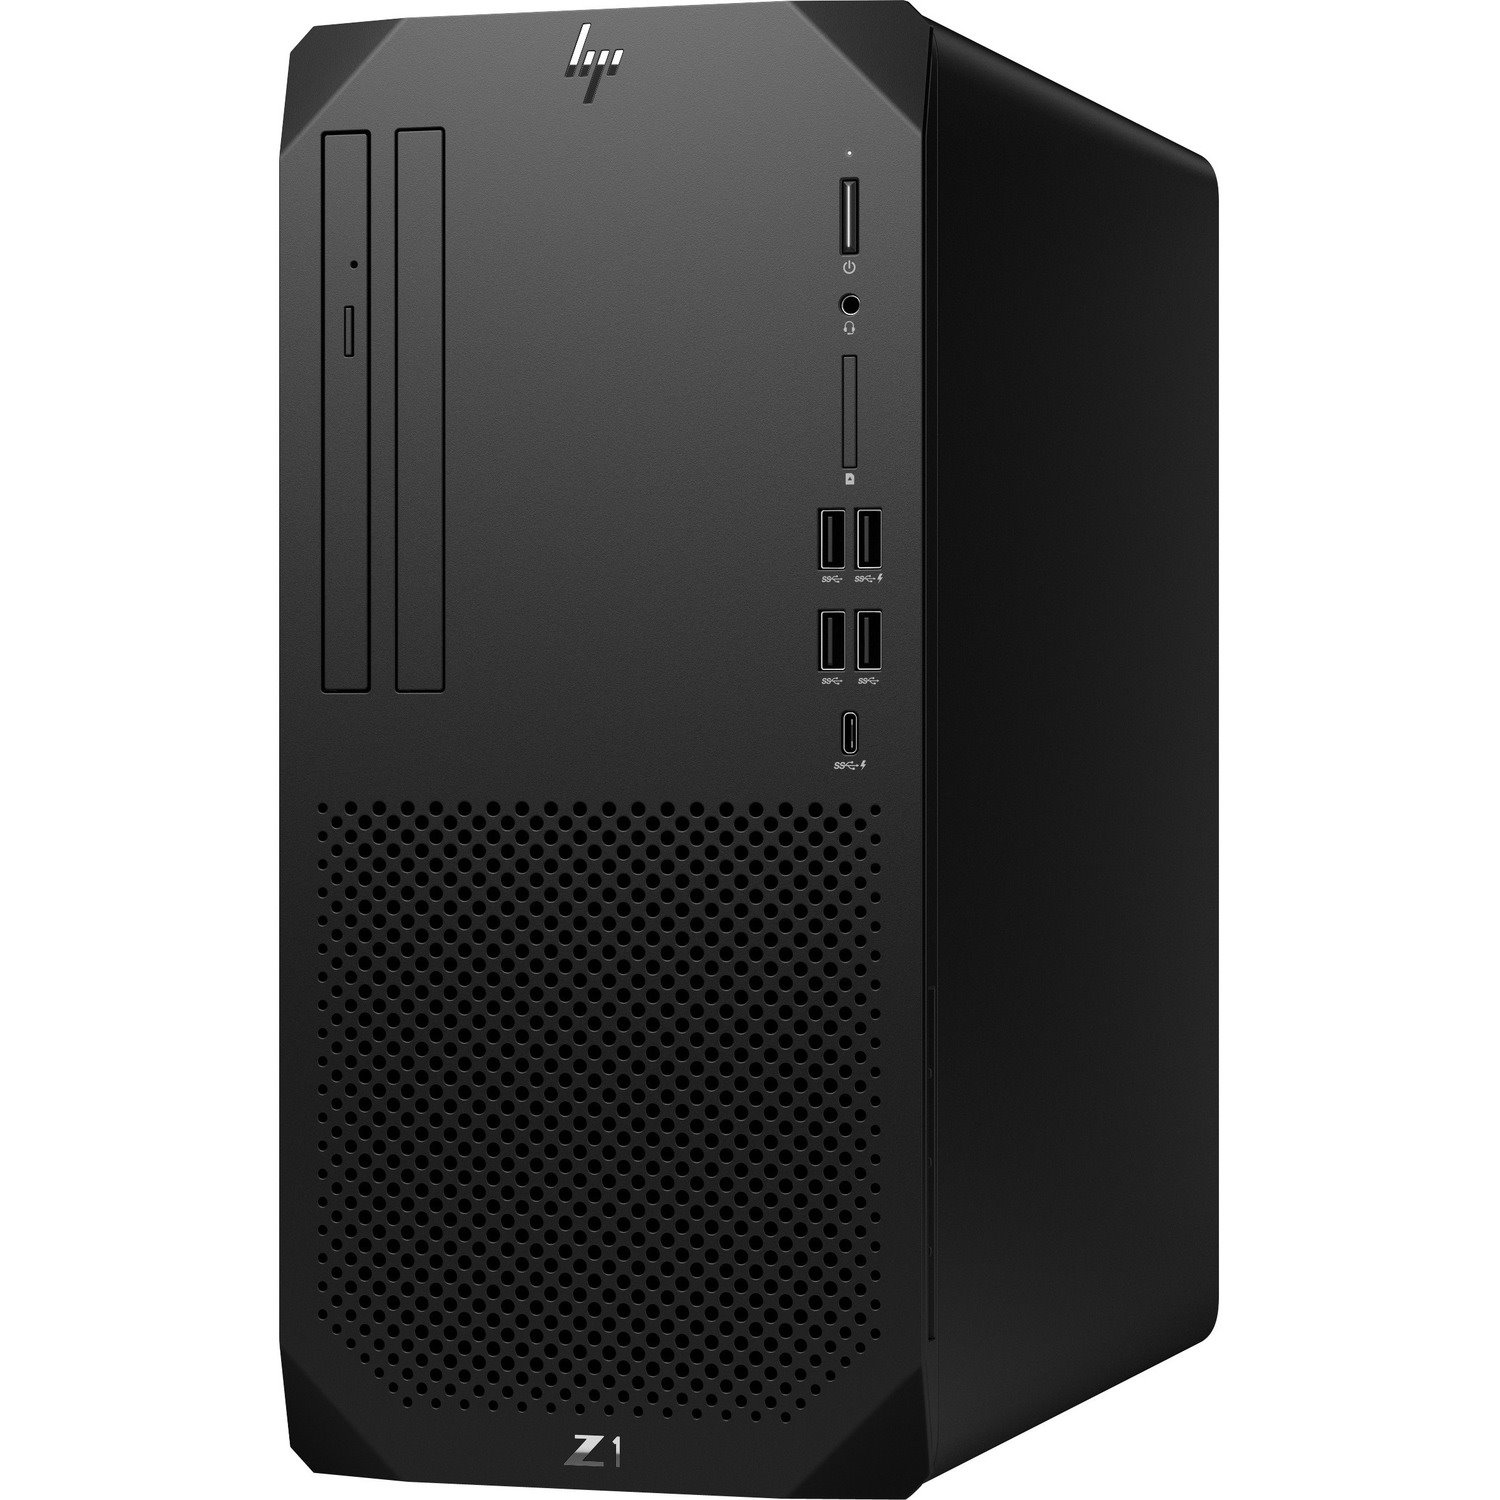 HP Z1 G9 Workstation - 1 x Intel Core i7 Dodeca-core (12 Core) i7-12700 12th Gen 2.10 GHz - 16 GB DDR5 SDRAM RAM - 1 TB HDD - 512 GB SSD - Tower - RTX3060-12GB  Dedicated Graphics - Win10 Pro - 3Yr On-Site